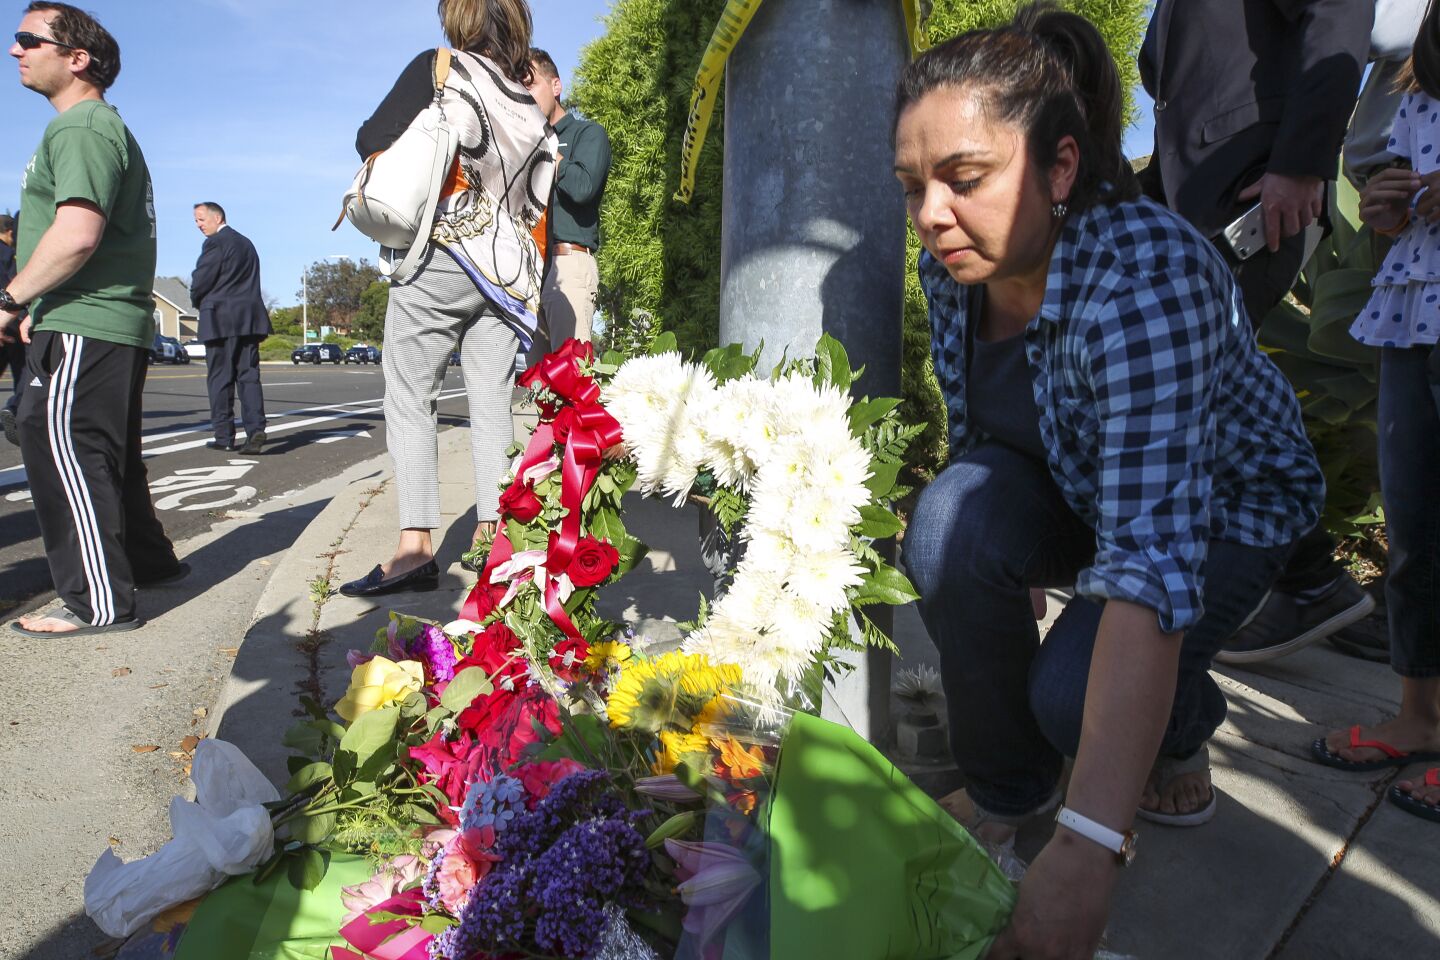 A woman leaves flowers at small memorial near Chabad of Poway, where a man with a gun shot multiple people inside the synagogue, killing one, in Poway on Saturday, April 27, 2019 in Poway, California.